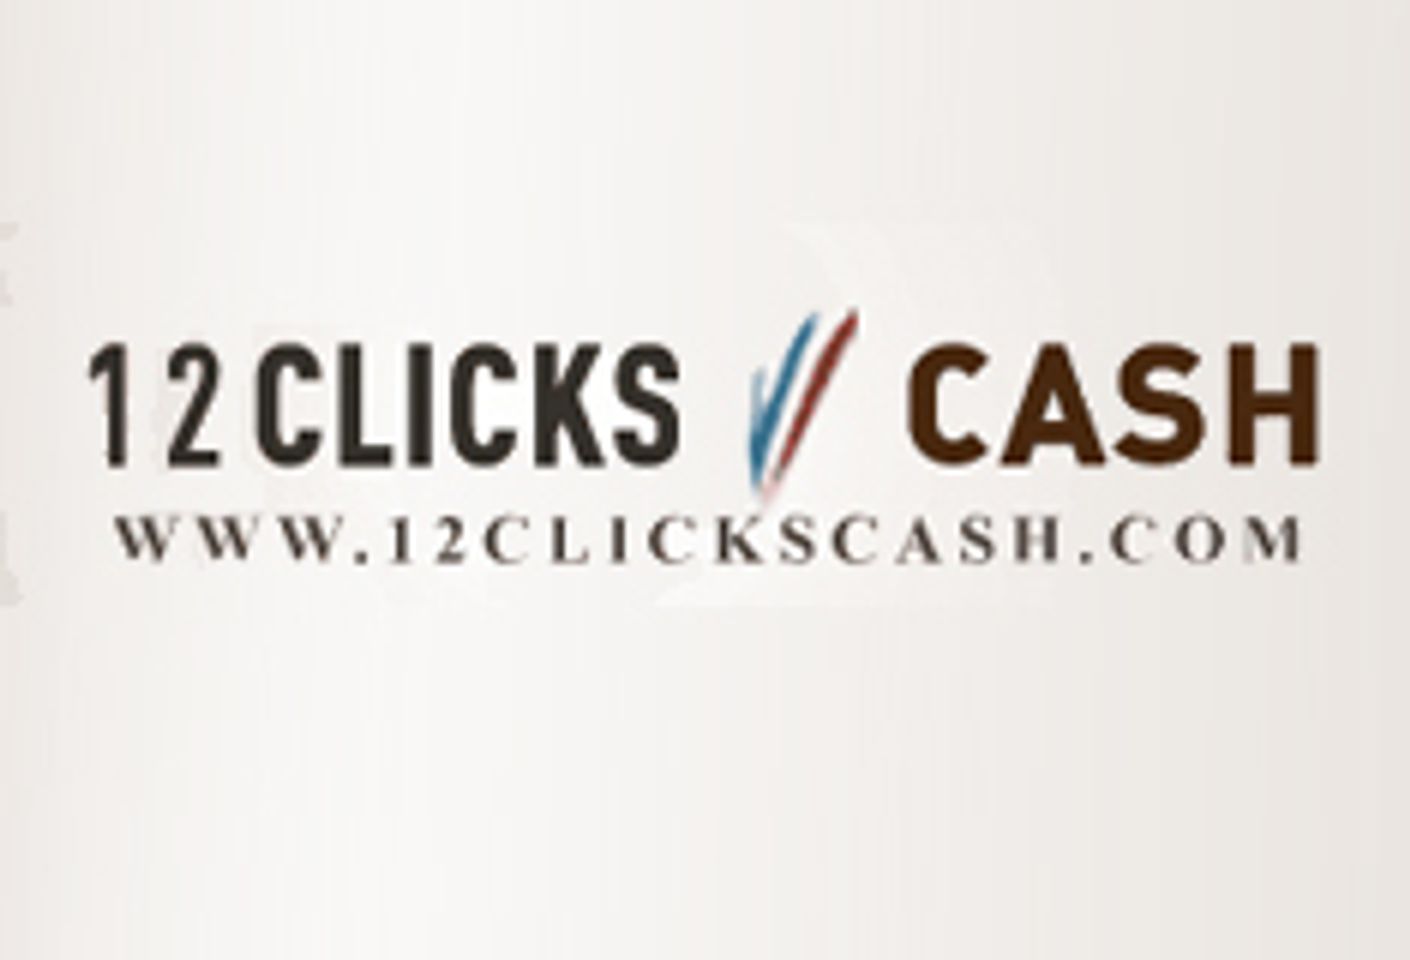 12clicksCash Adds 200 New Static Galleries